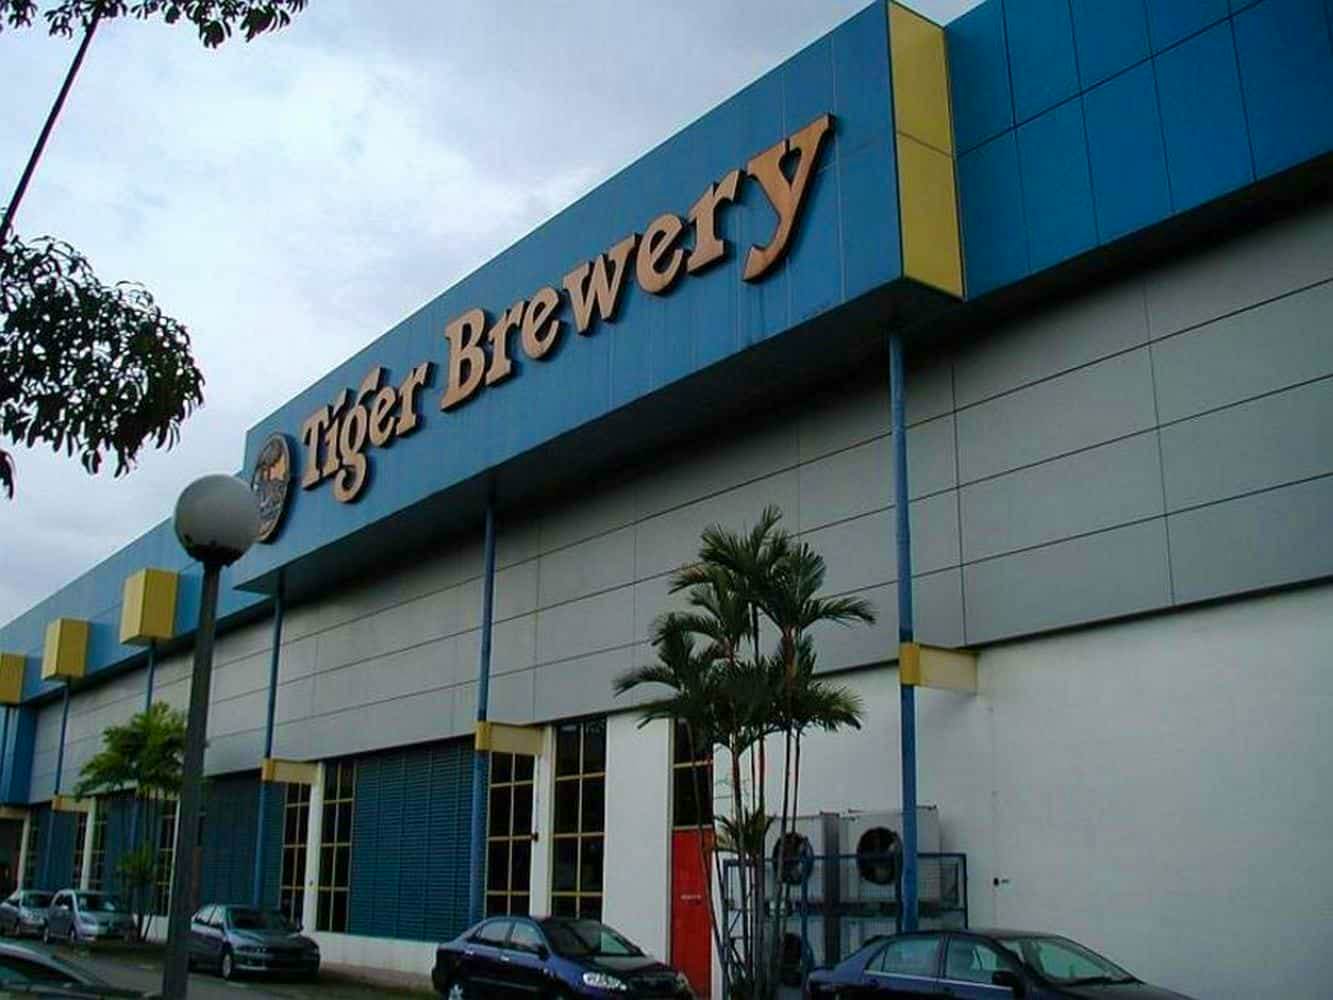 Tiger Brewery Tour (admission) with private transfers